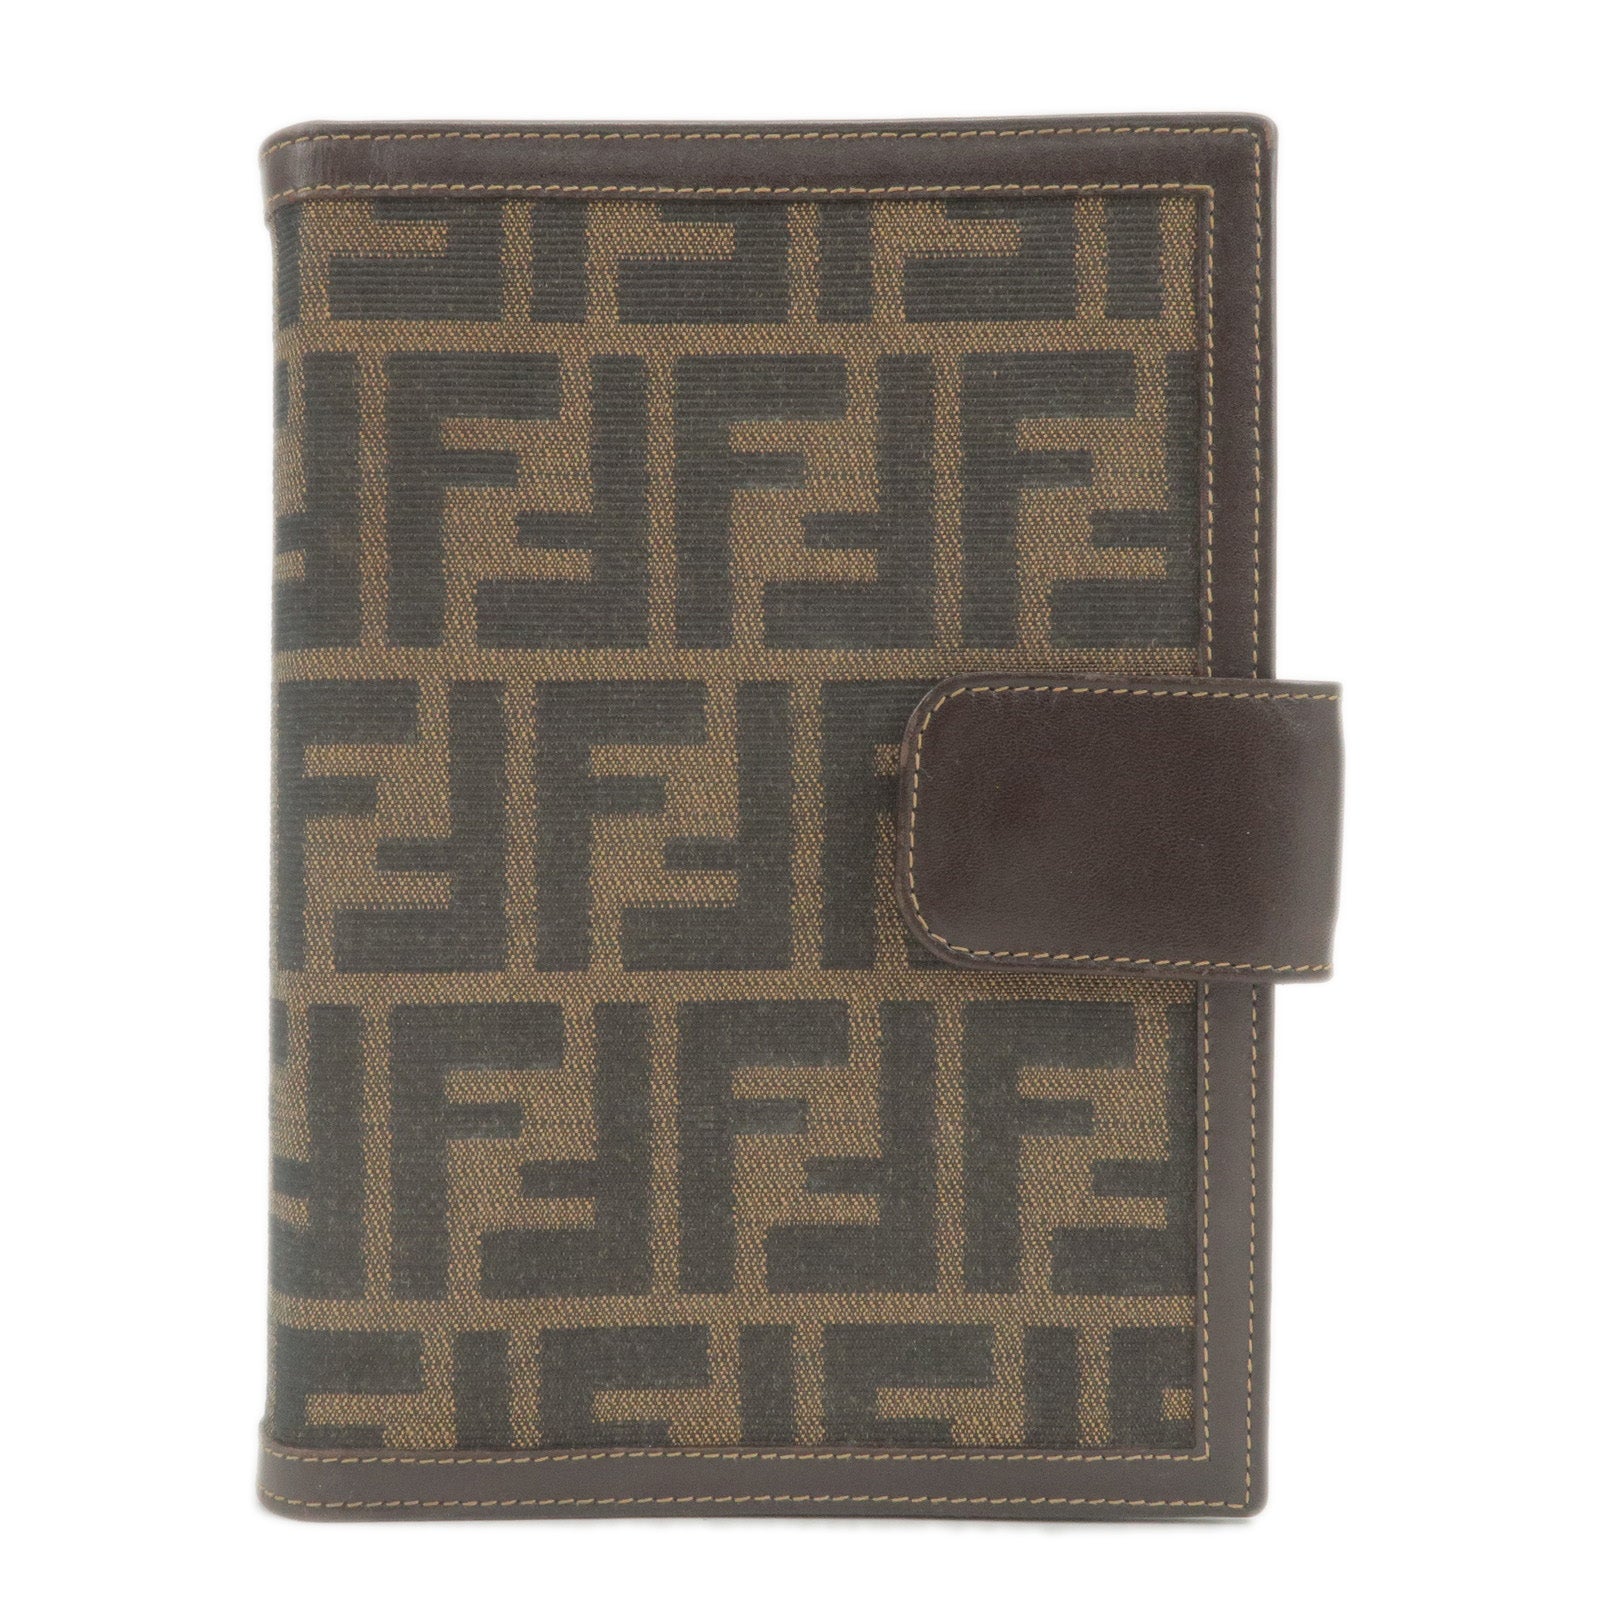 FENDI-Zucca-Print-Canvas-Leather-Planner-Cover-Brown-Black-30161